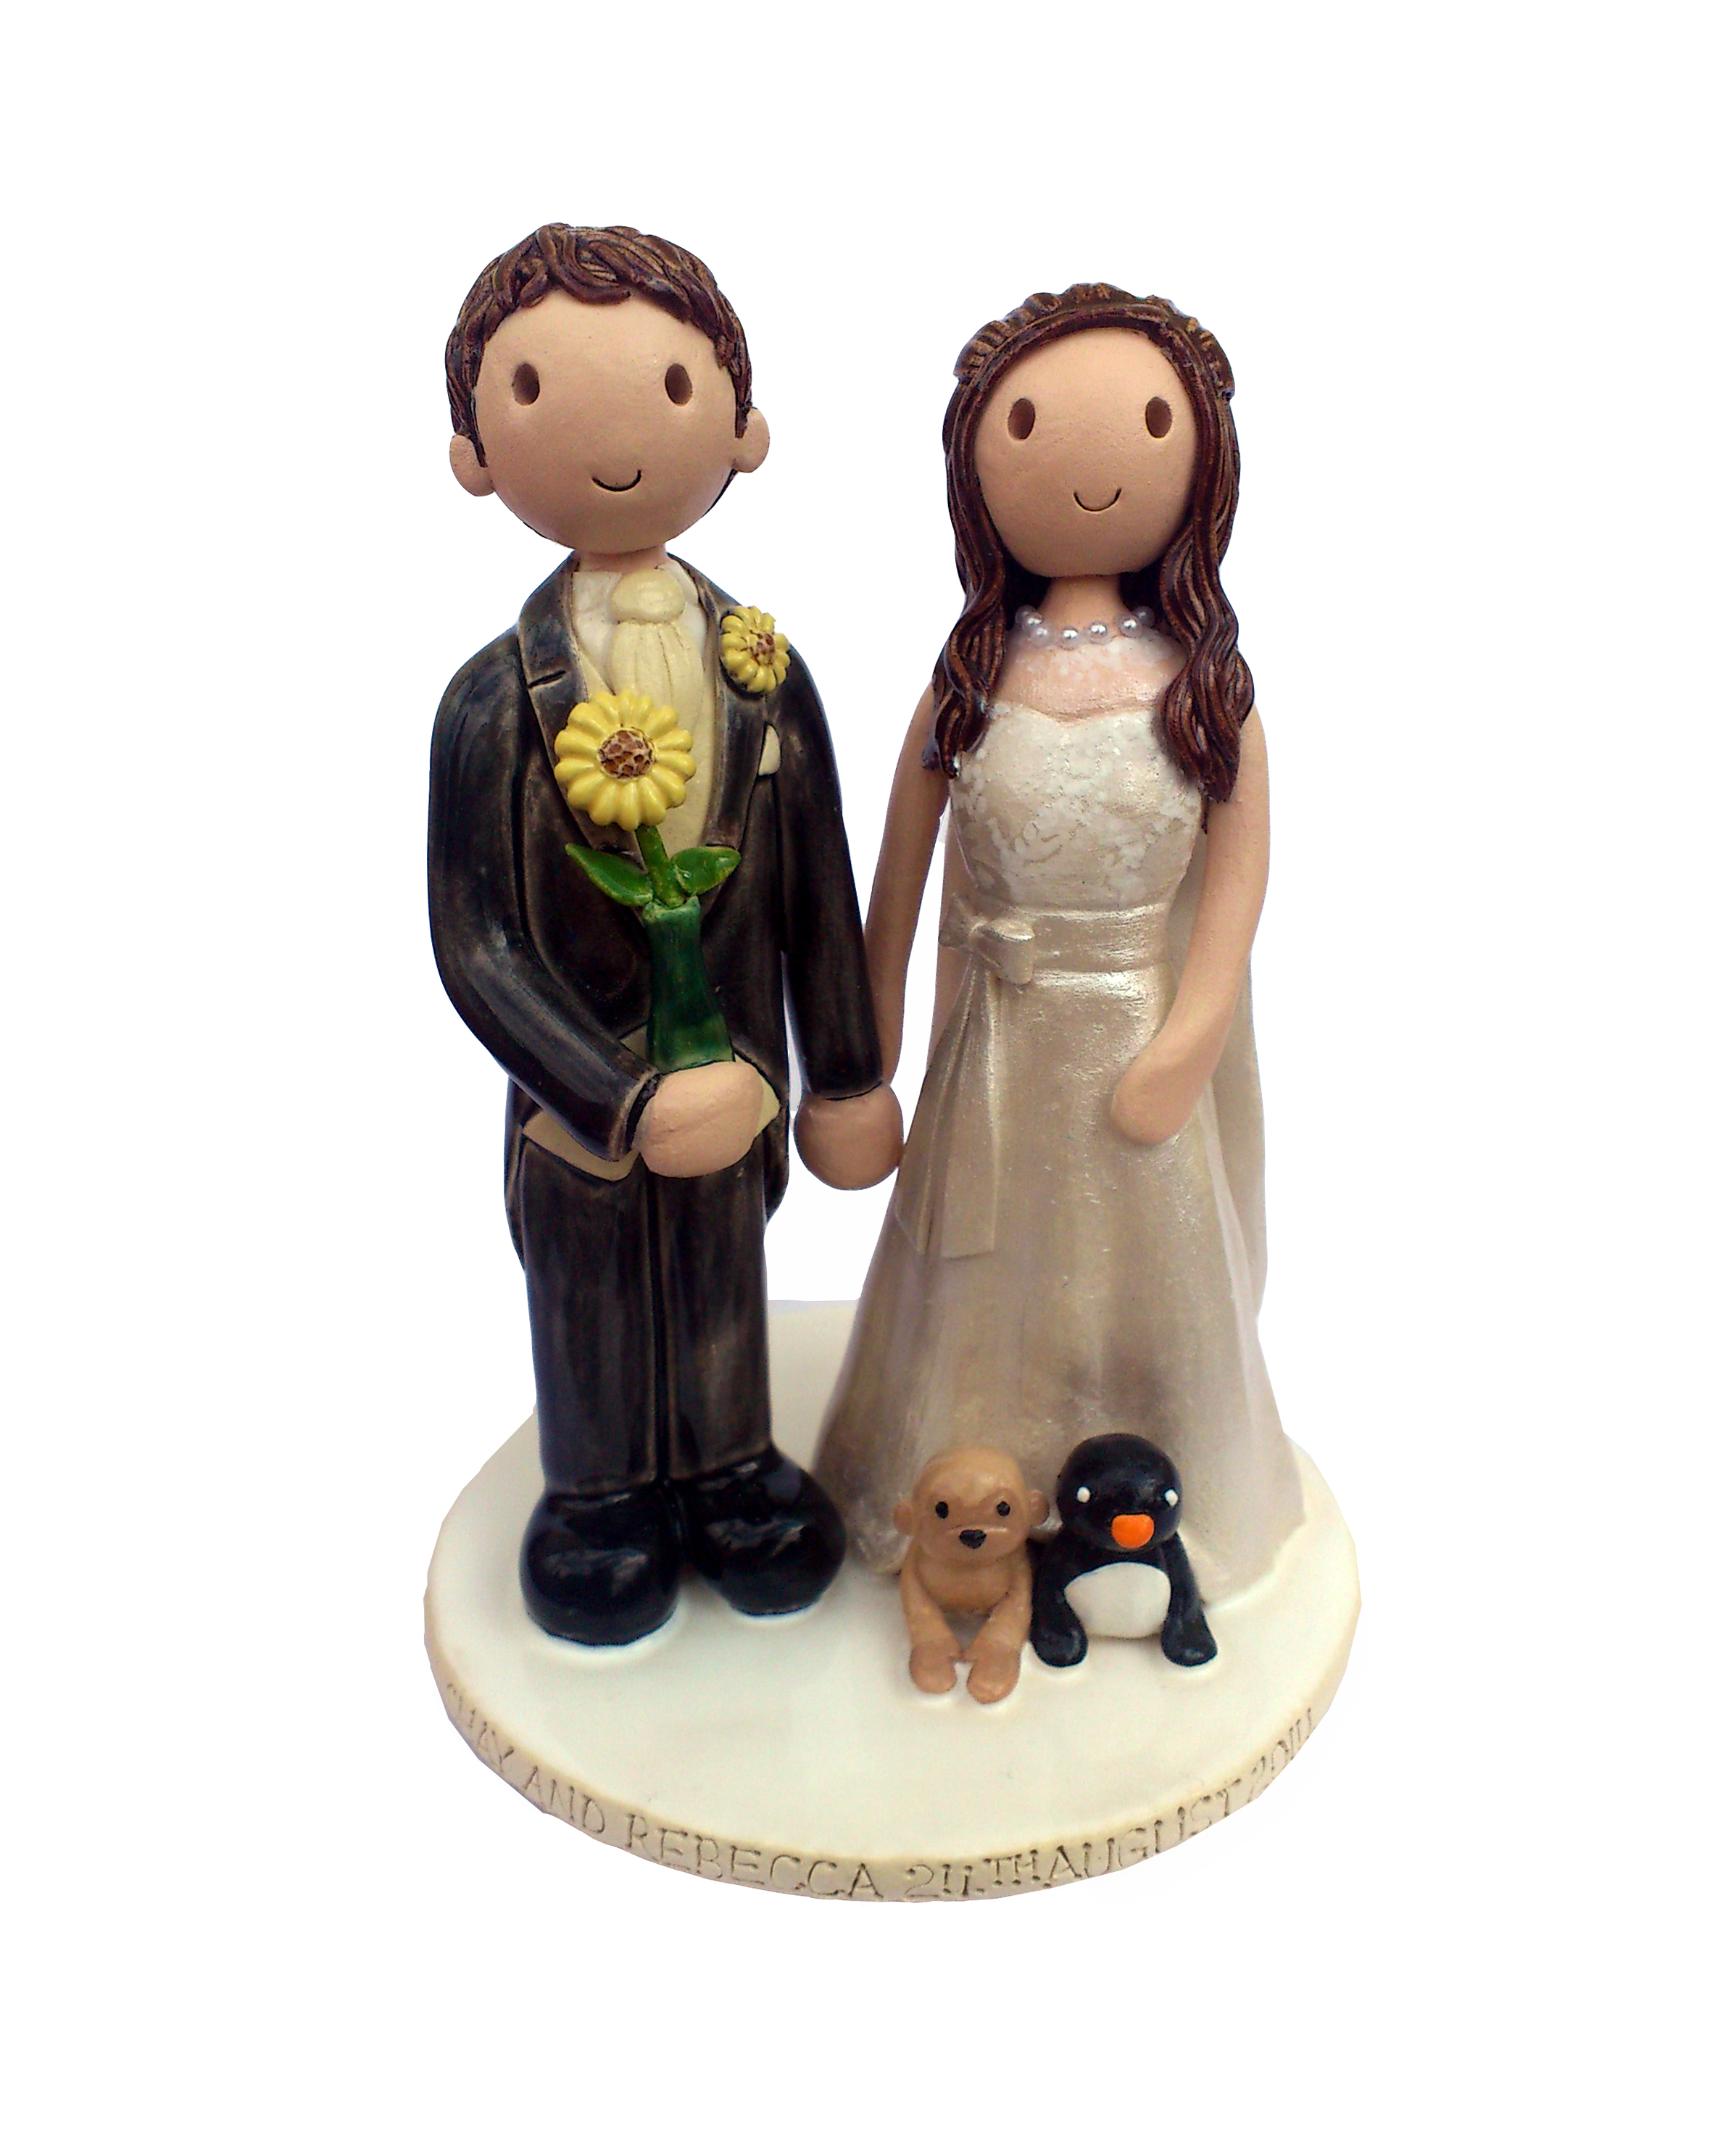  Wedding  Cake  Toppers  Gallery Examples Of Toppers  We Have 